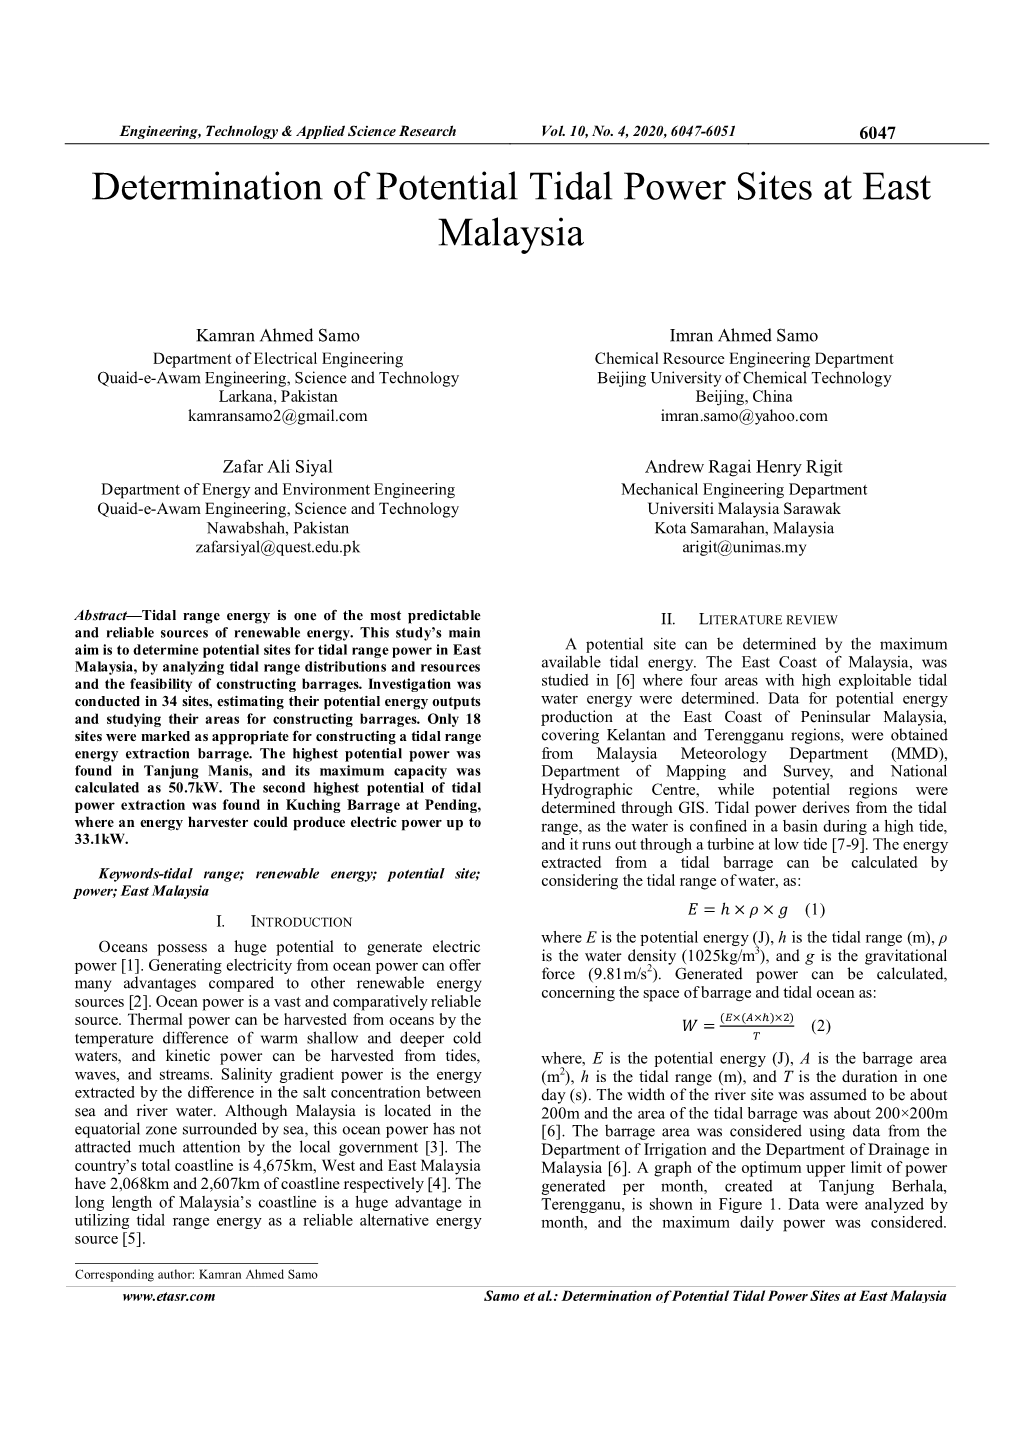 Determination of Potential Tidal Power Sites at East Malaysia